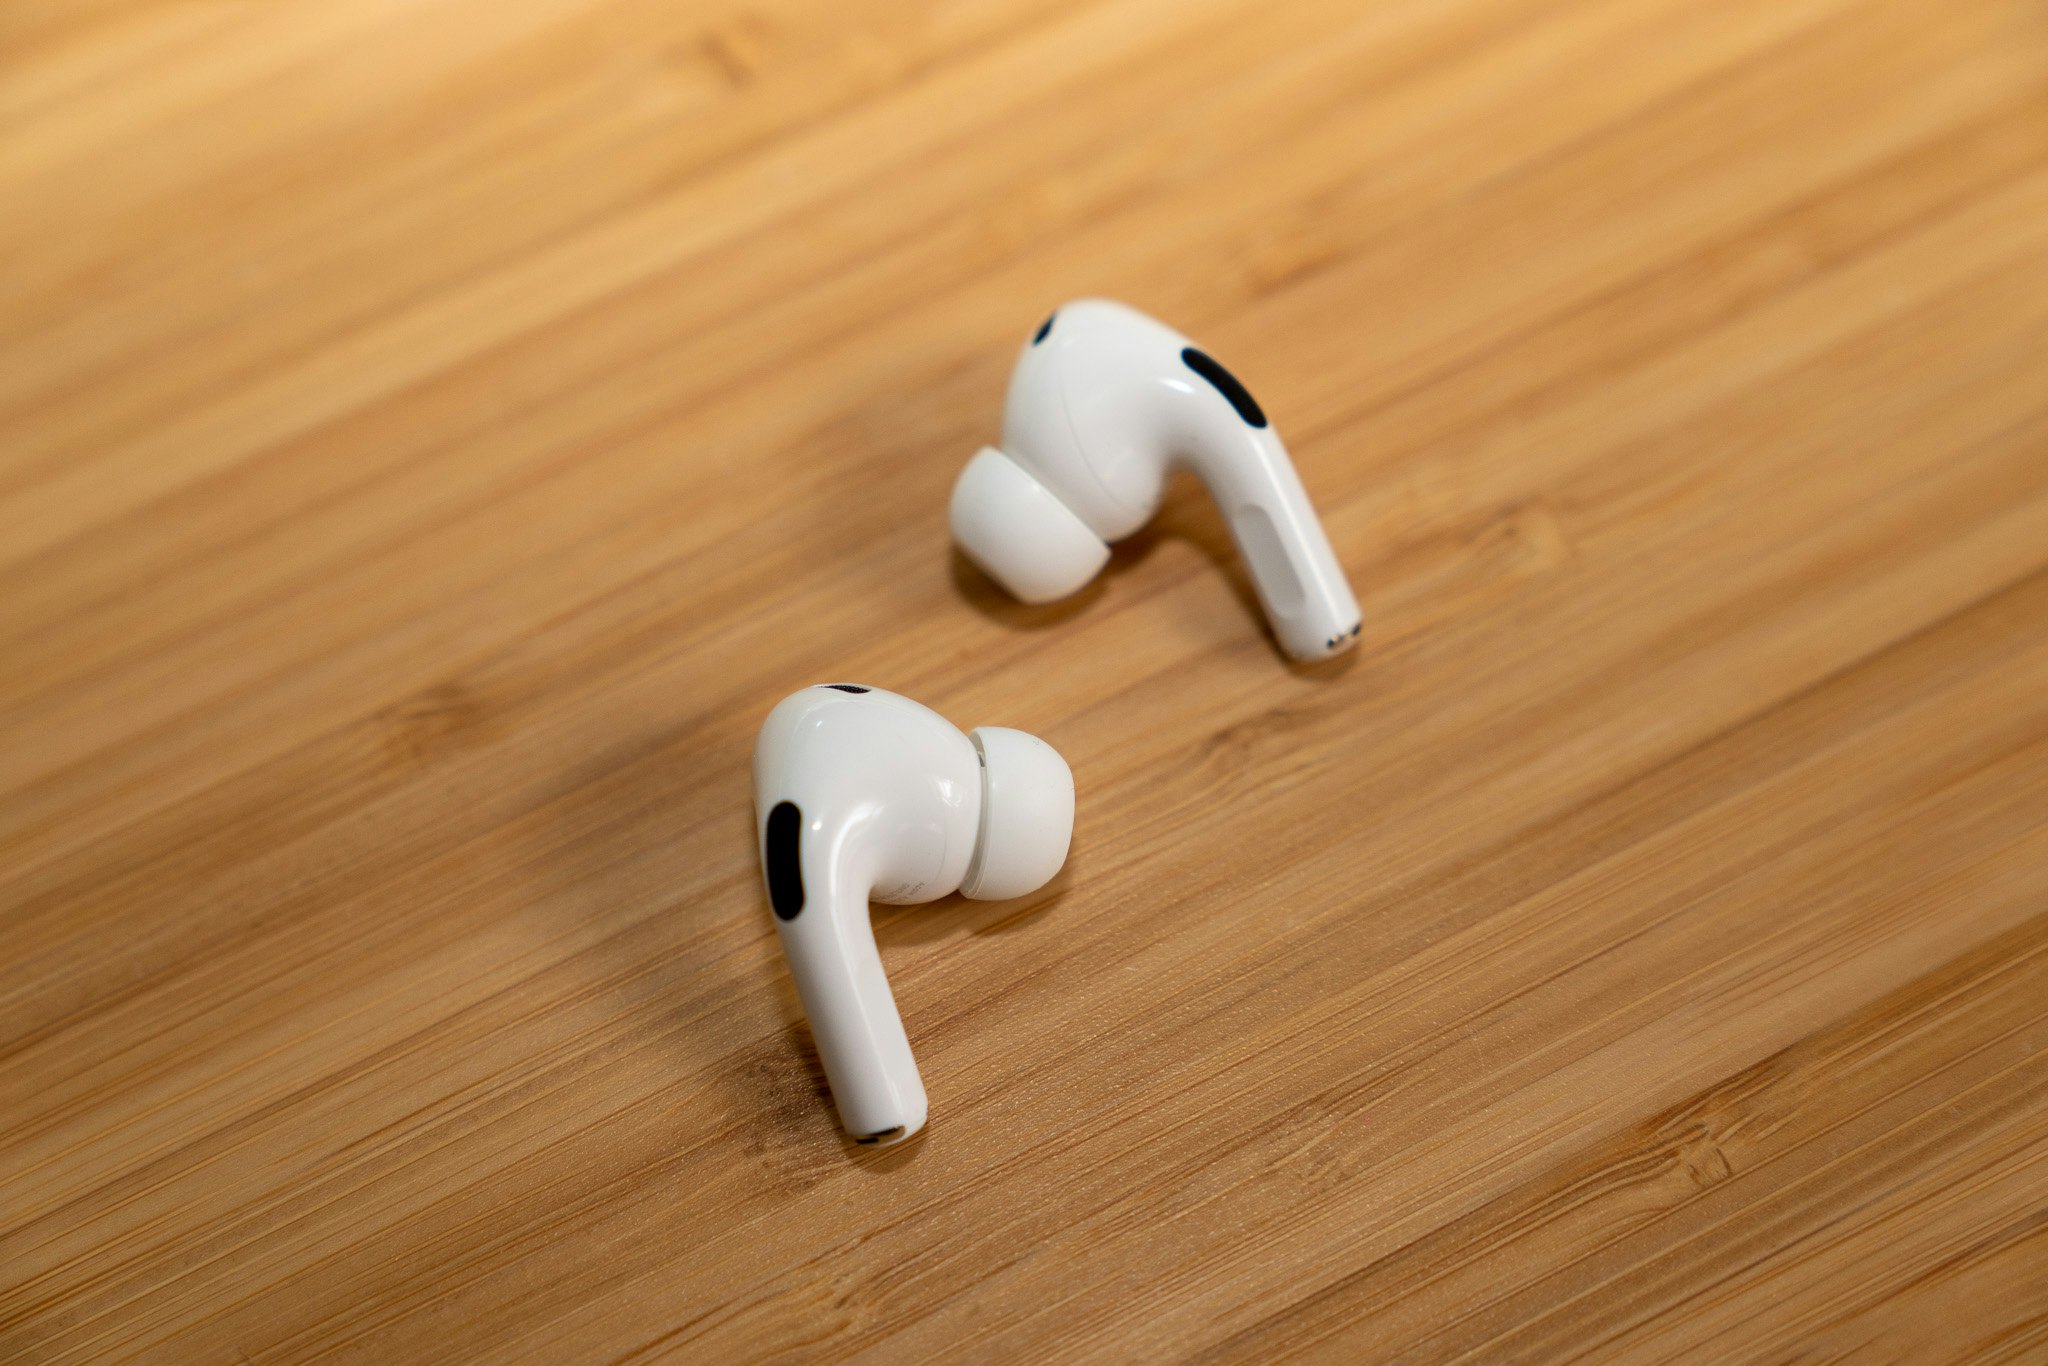 Apple Airpods Pro 2 updated with USB-C charging, lossless audio support and  IP54 rating -  News